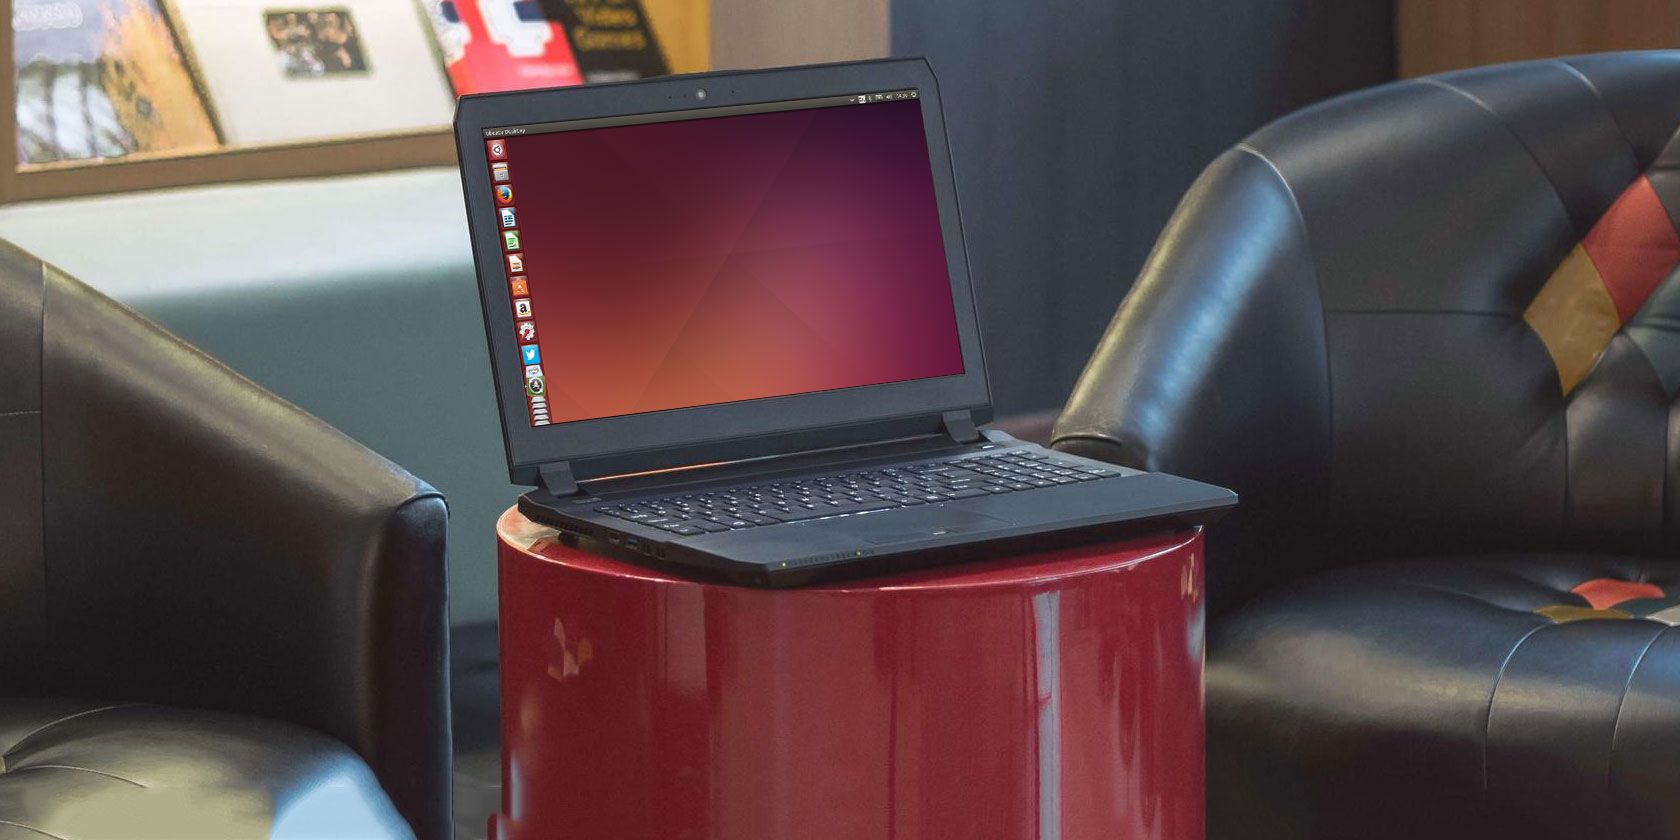 The 5 Best Cheap Linux Laptops To Buy In 2019